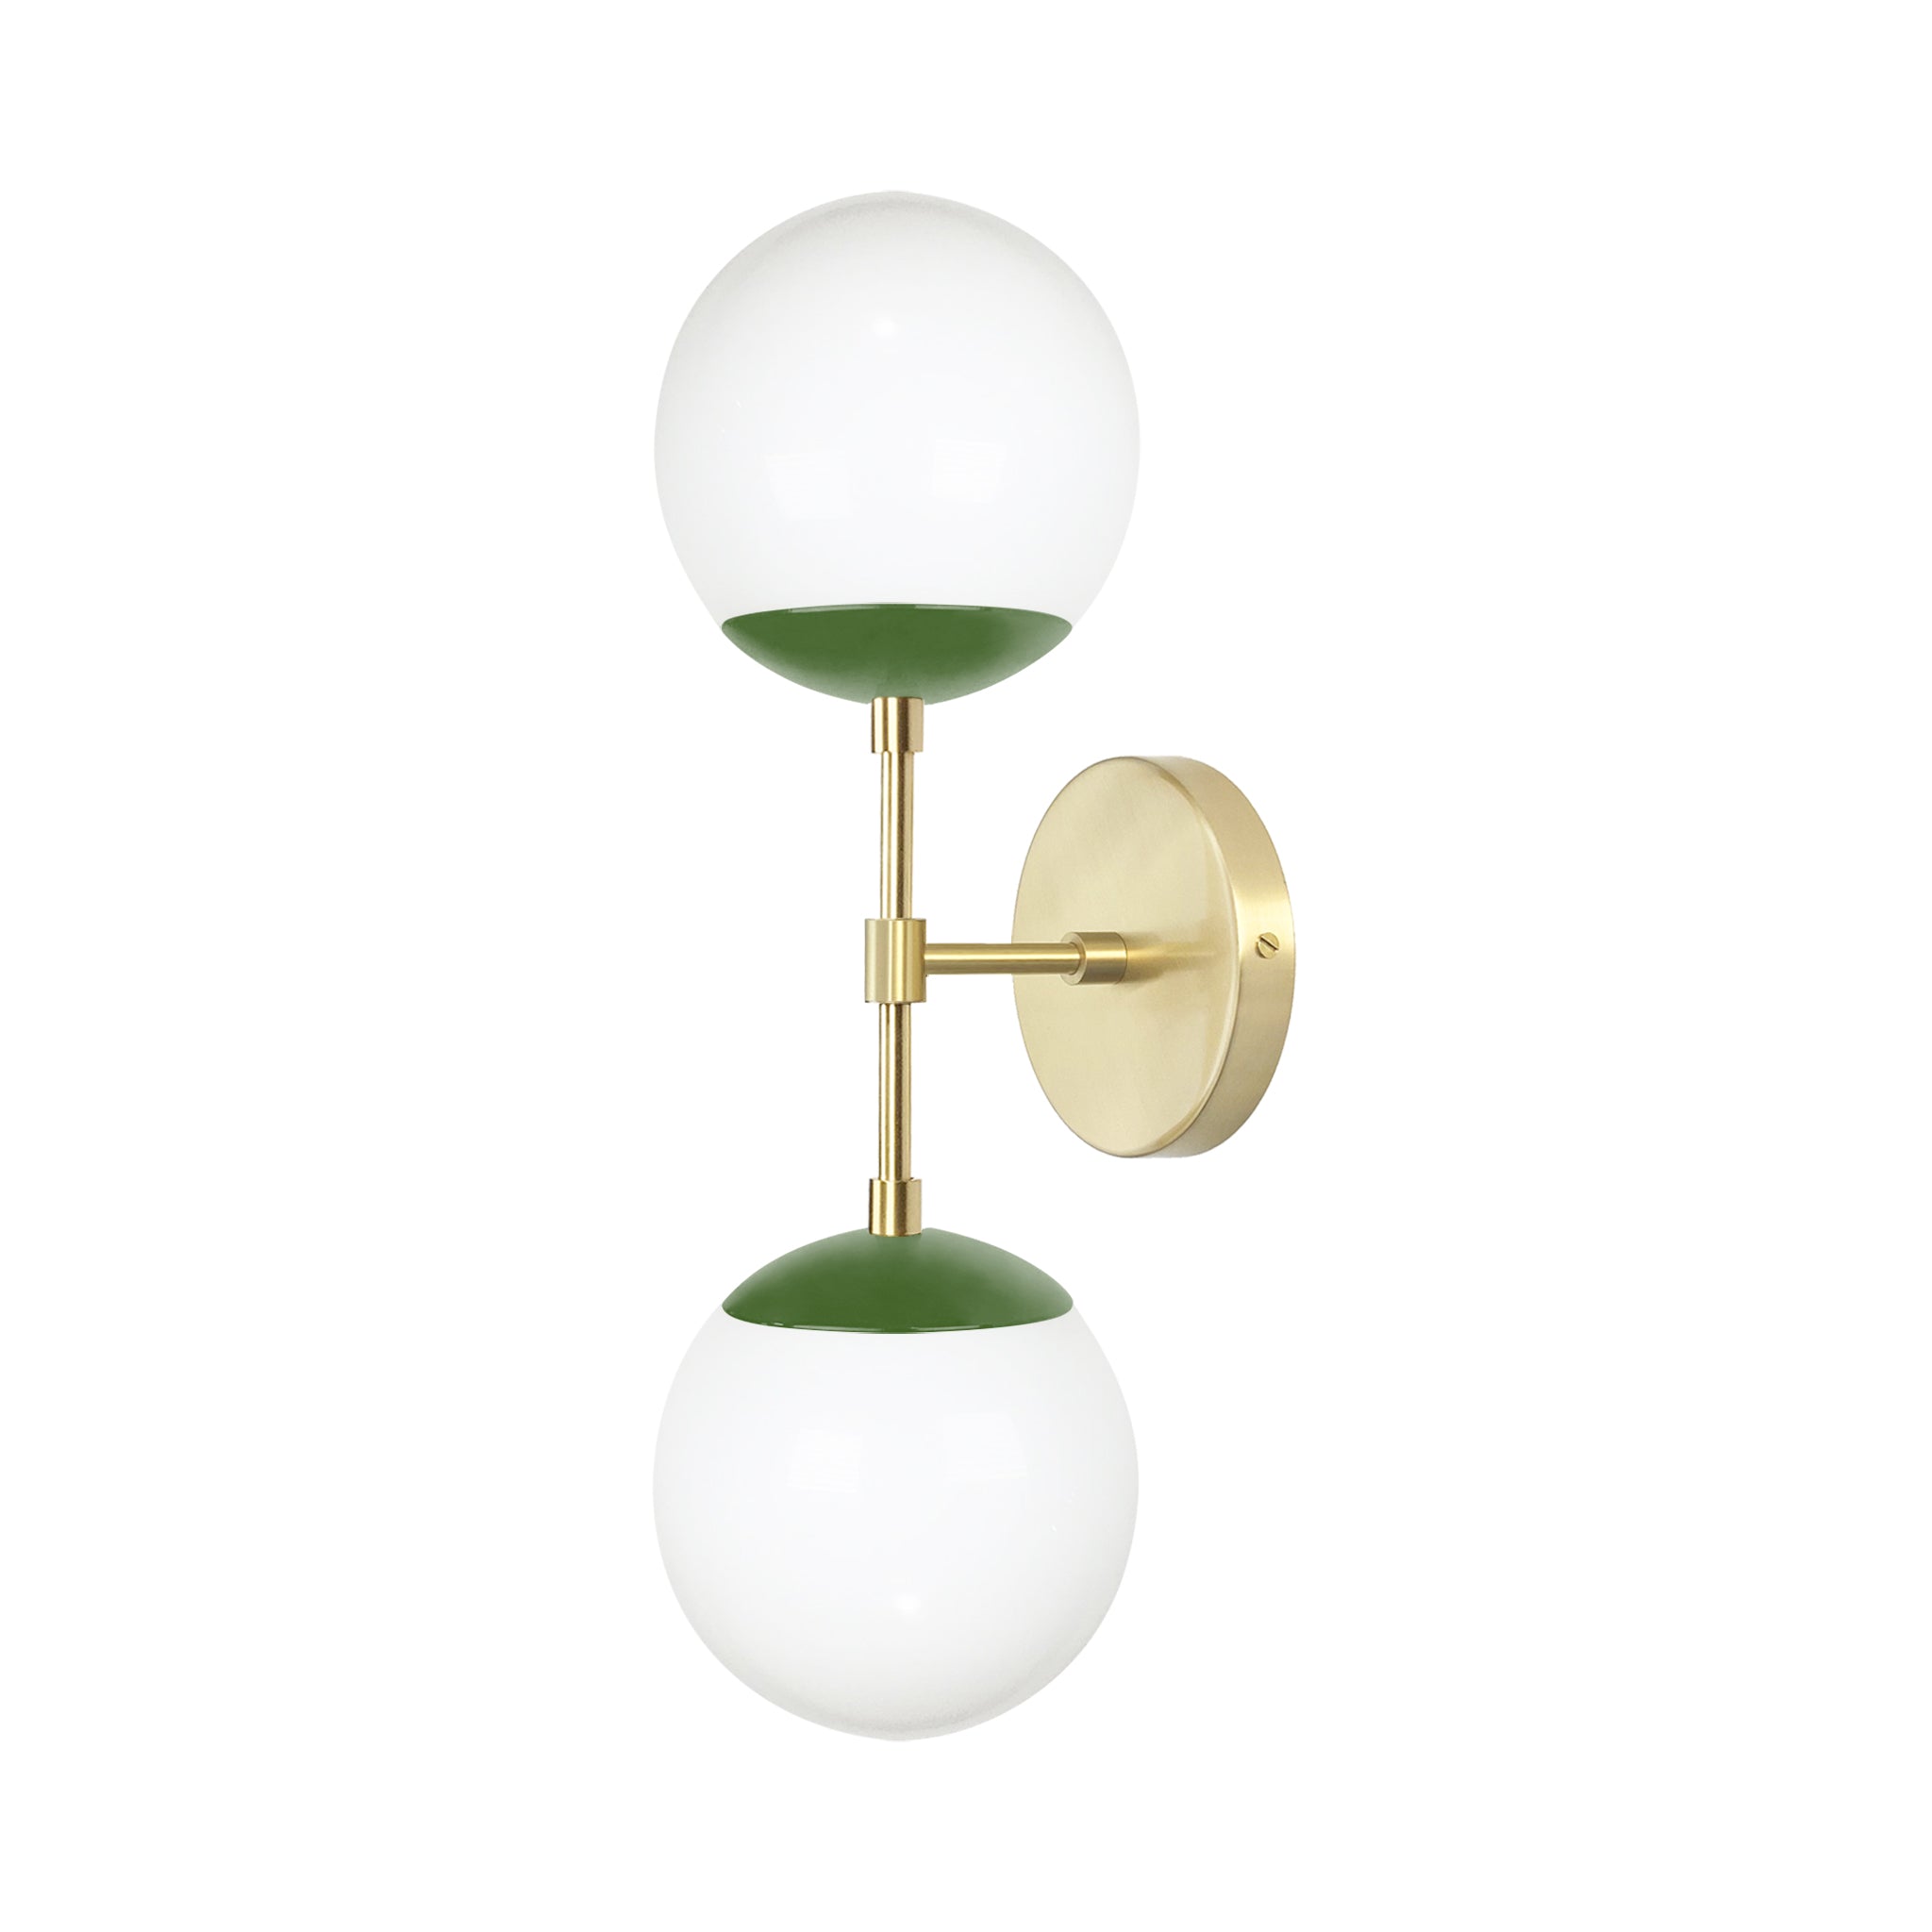 Brass and python green color Cap Double sconce 6" Dutton Brown lighting